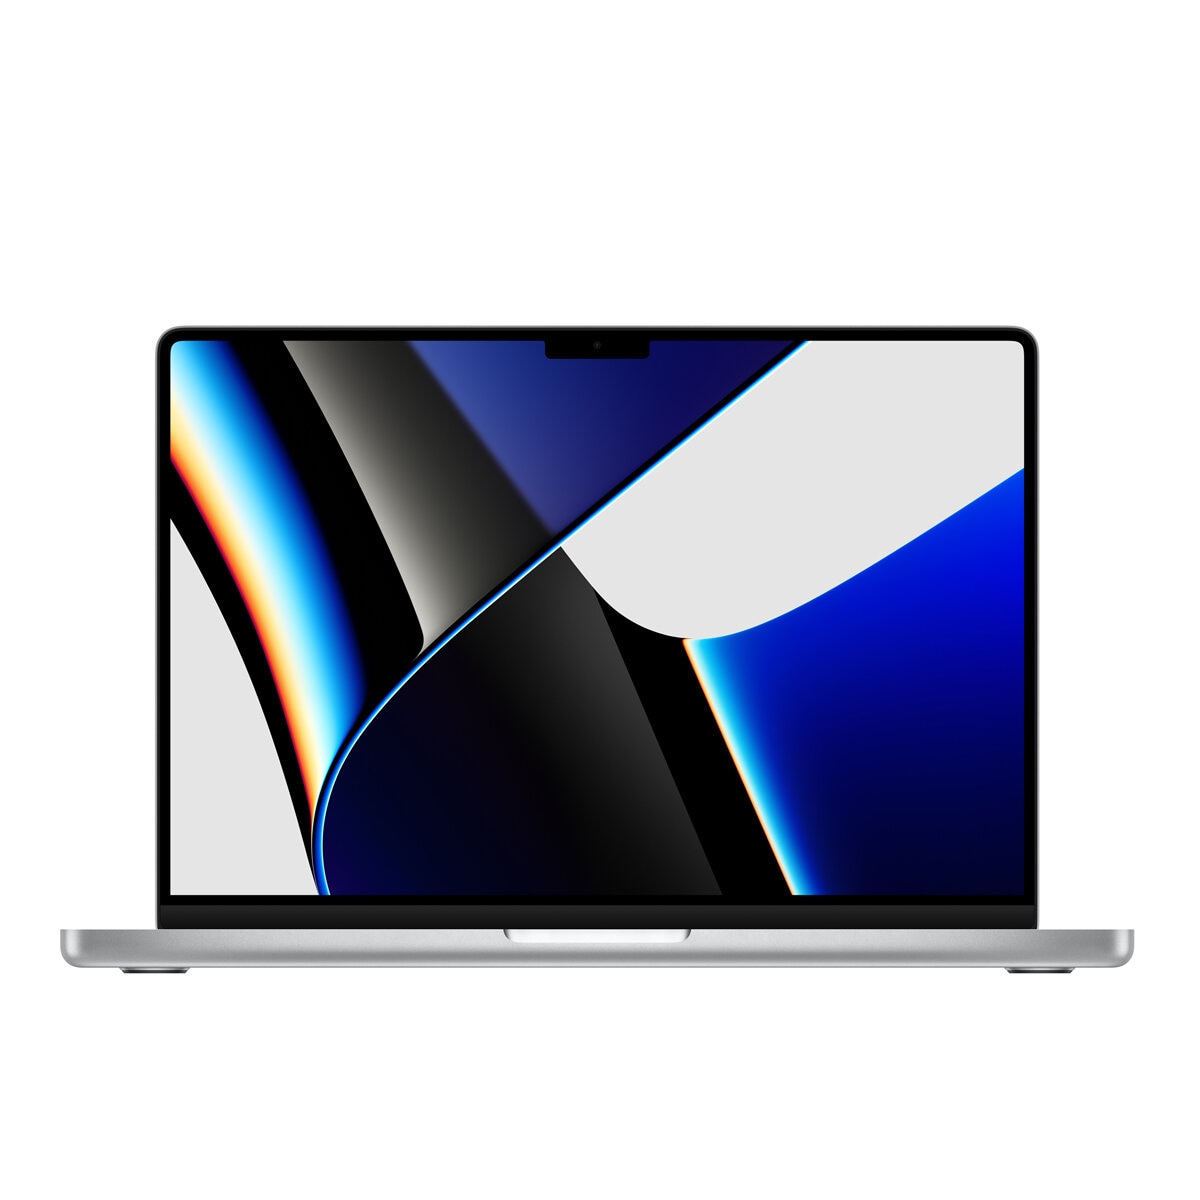 MacBook Pro 14 Inch with M1 Pro Chip